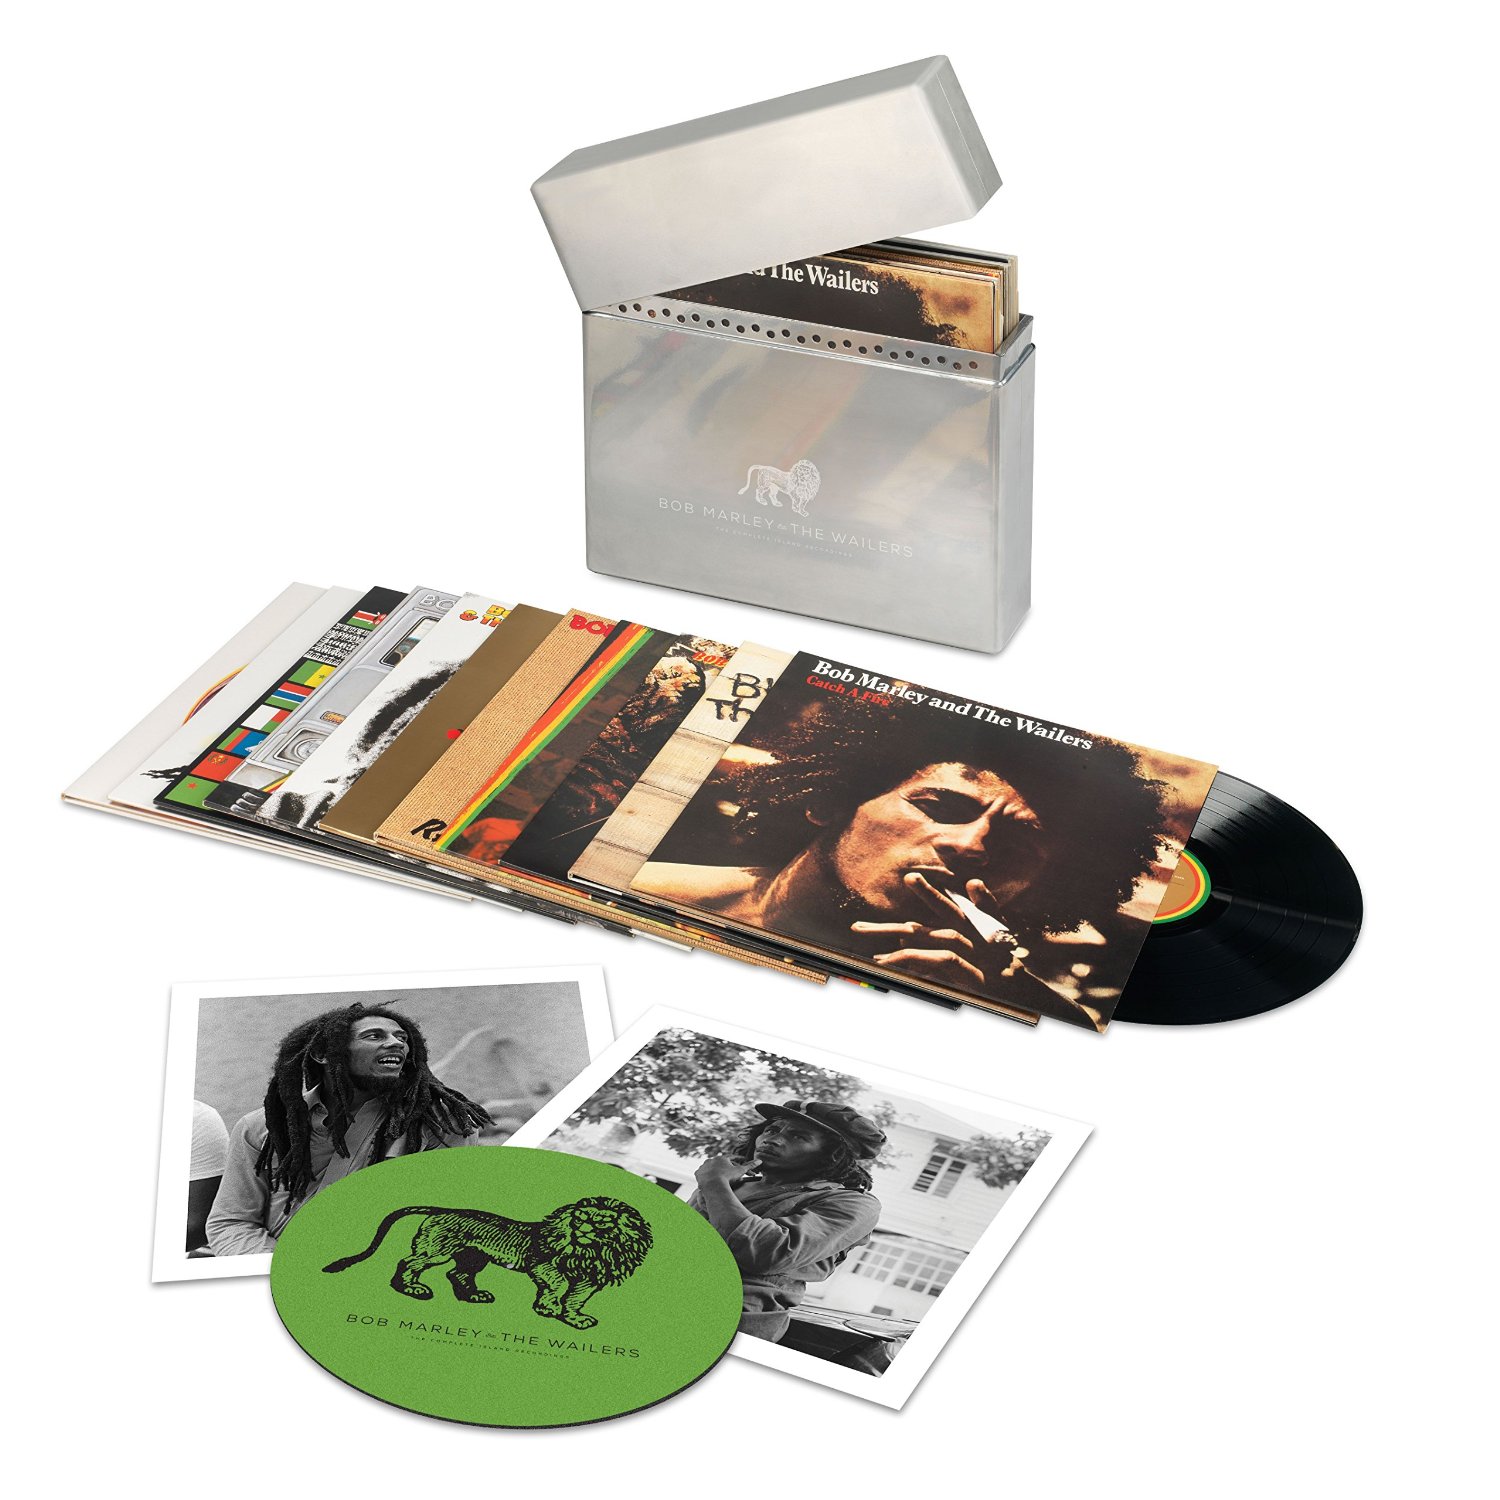 THE COMPLETE ISLAND RECORDINGS: COLLECTOR'S EDITION/BOB MARLEY 